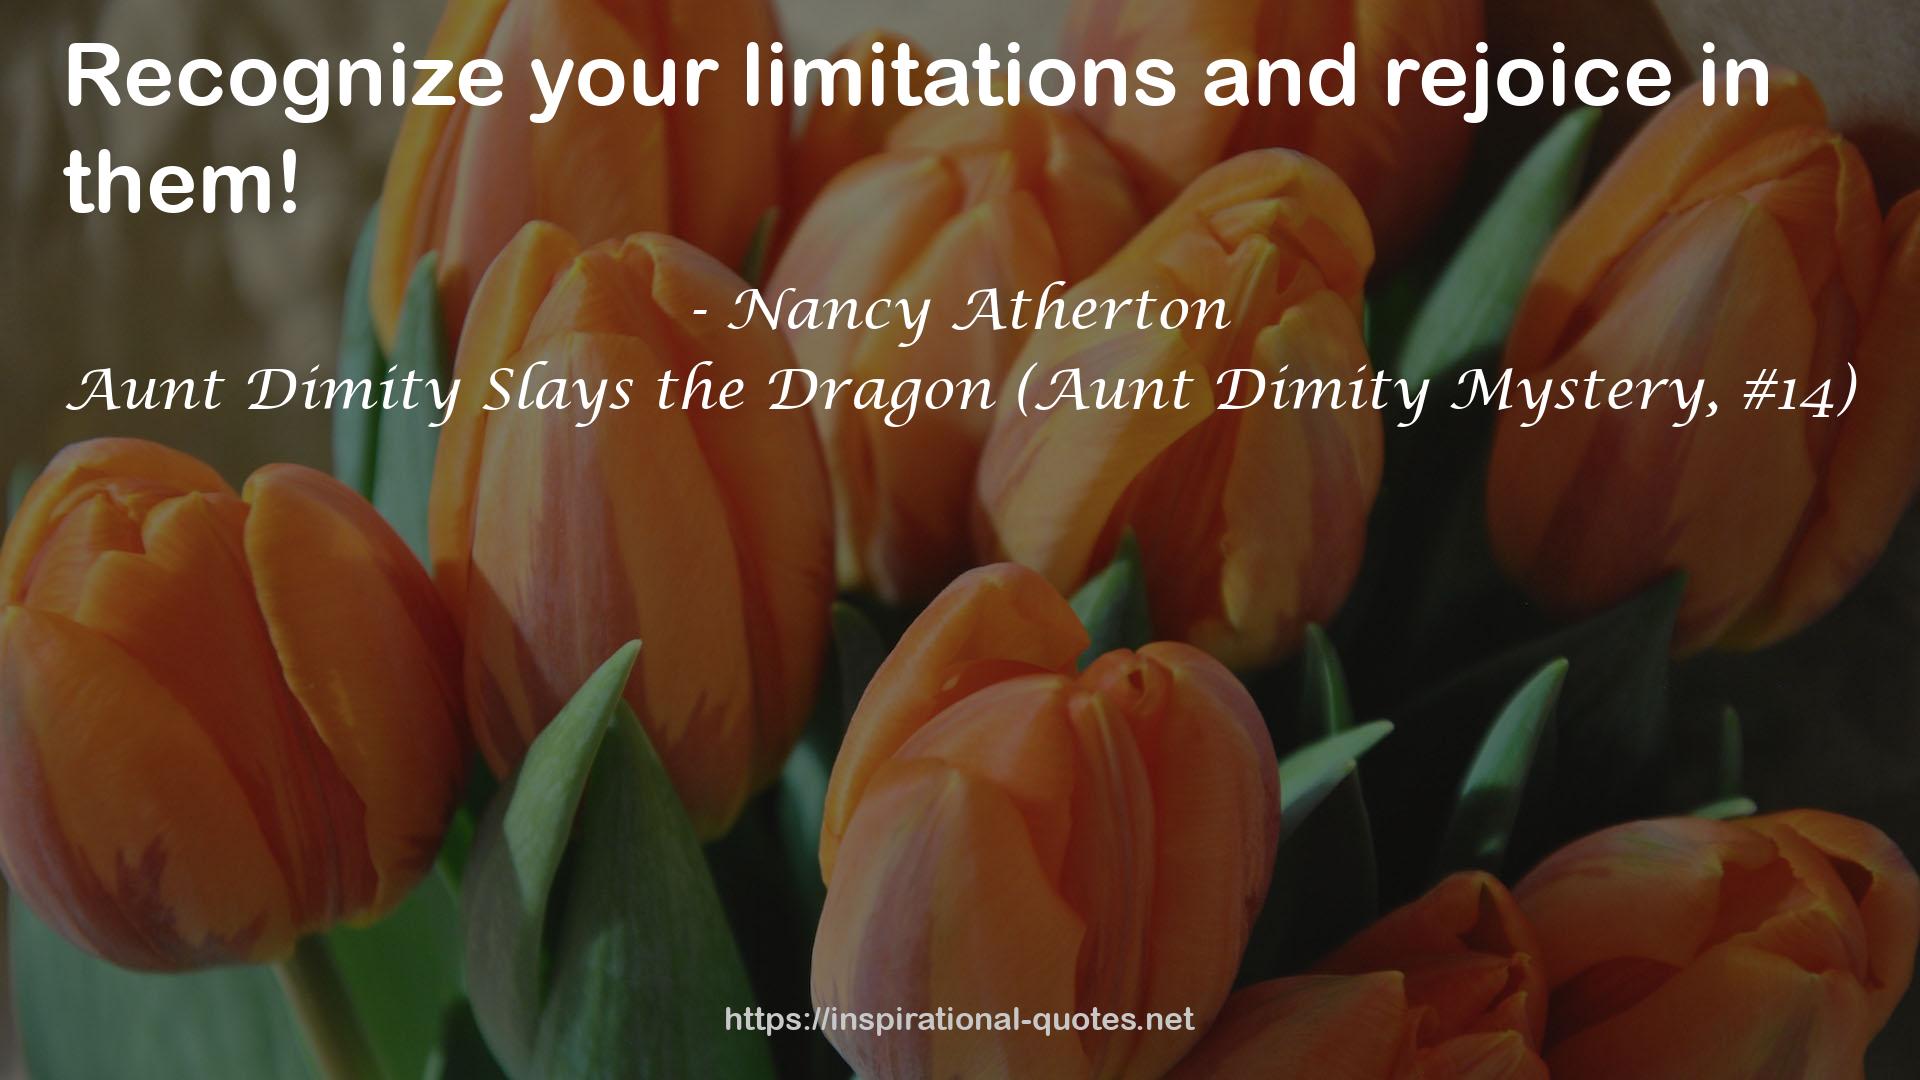 Aunt Dimity Slays the Dragon (Aunt Dimity Mystery, #14) QUOTES